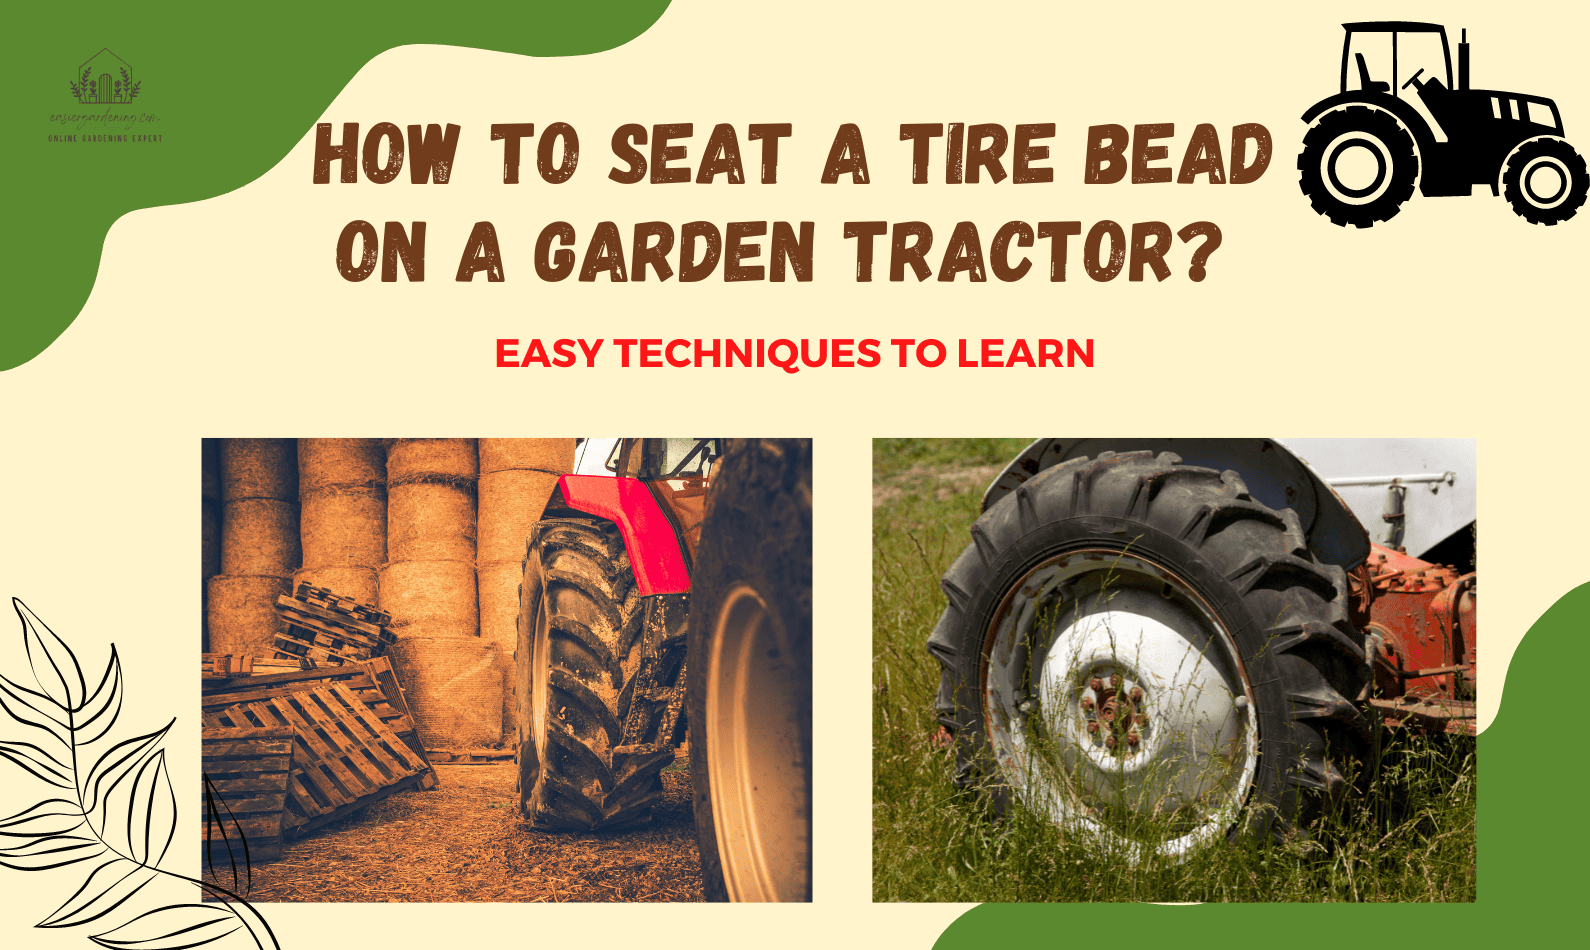 How to Seat a Tire Bead on a Garden Tractor?